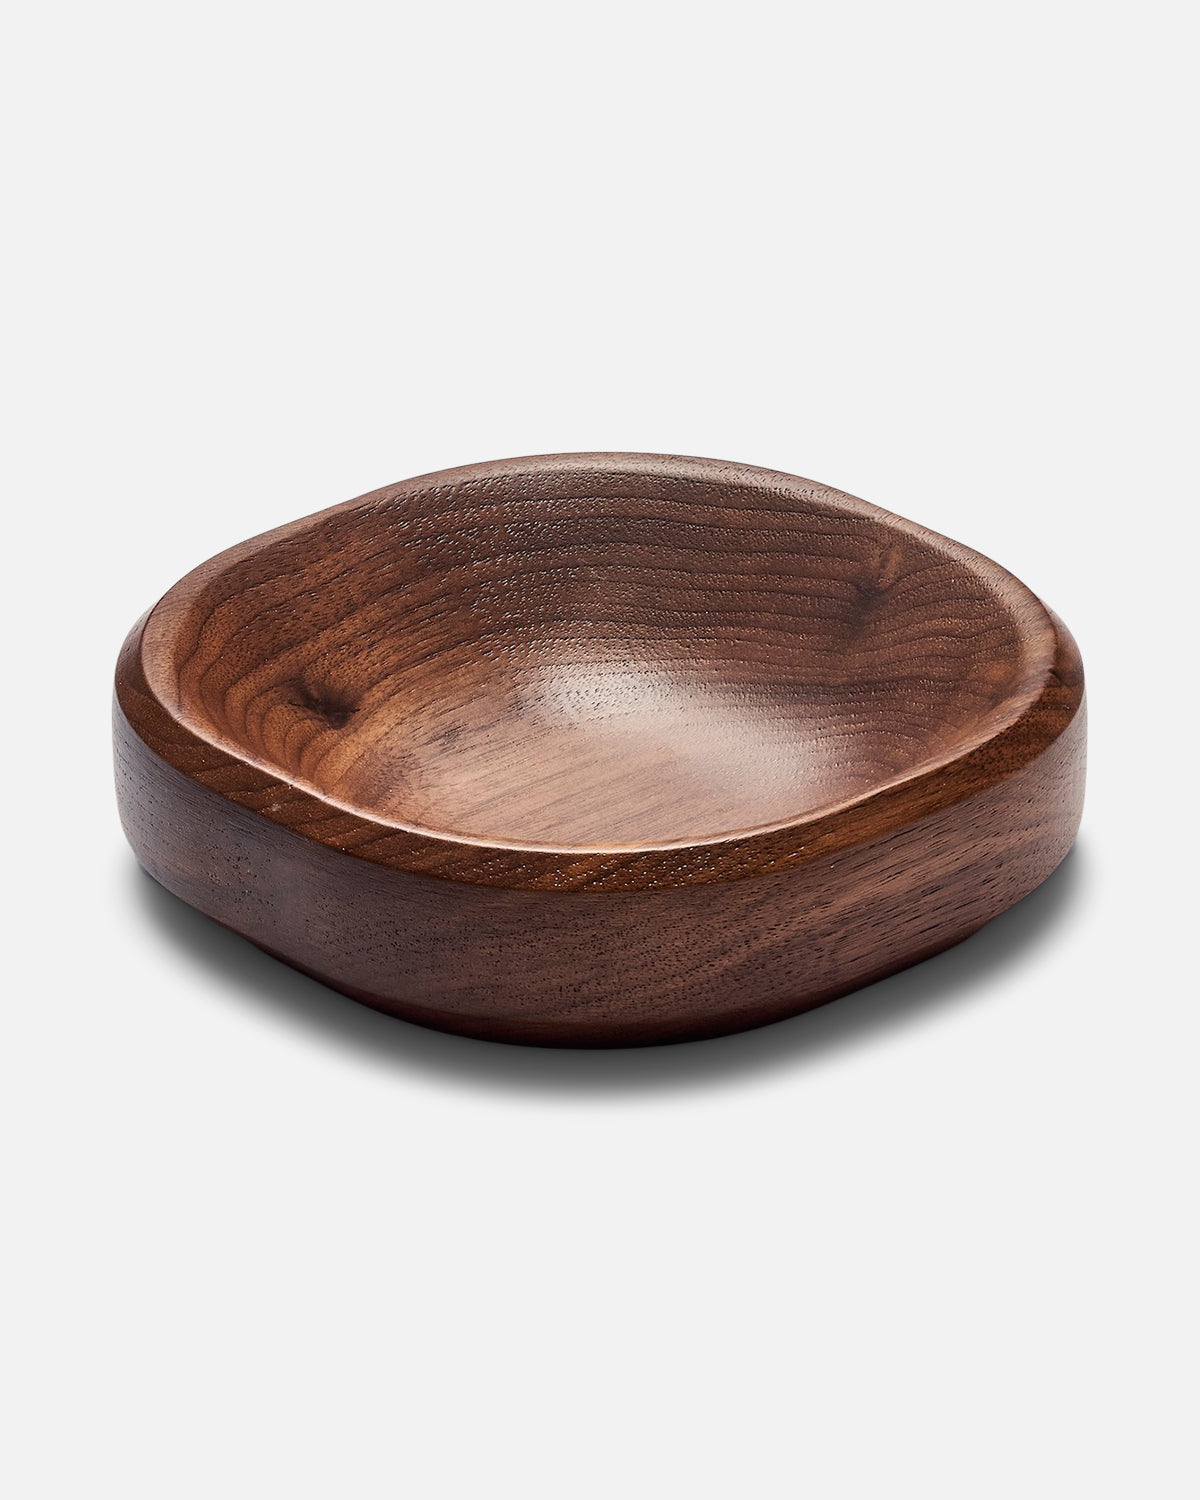 Facet Bowl - Small